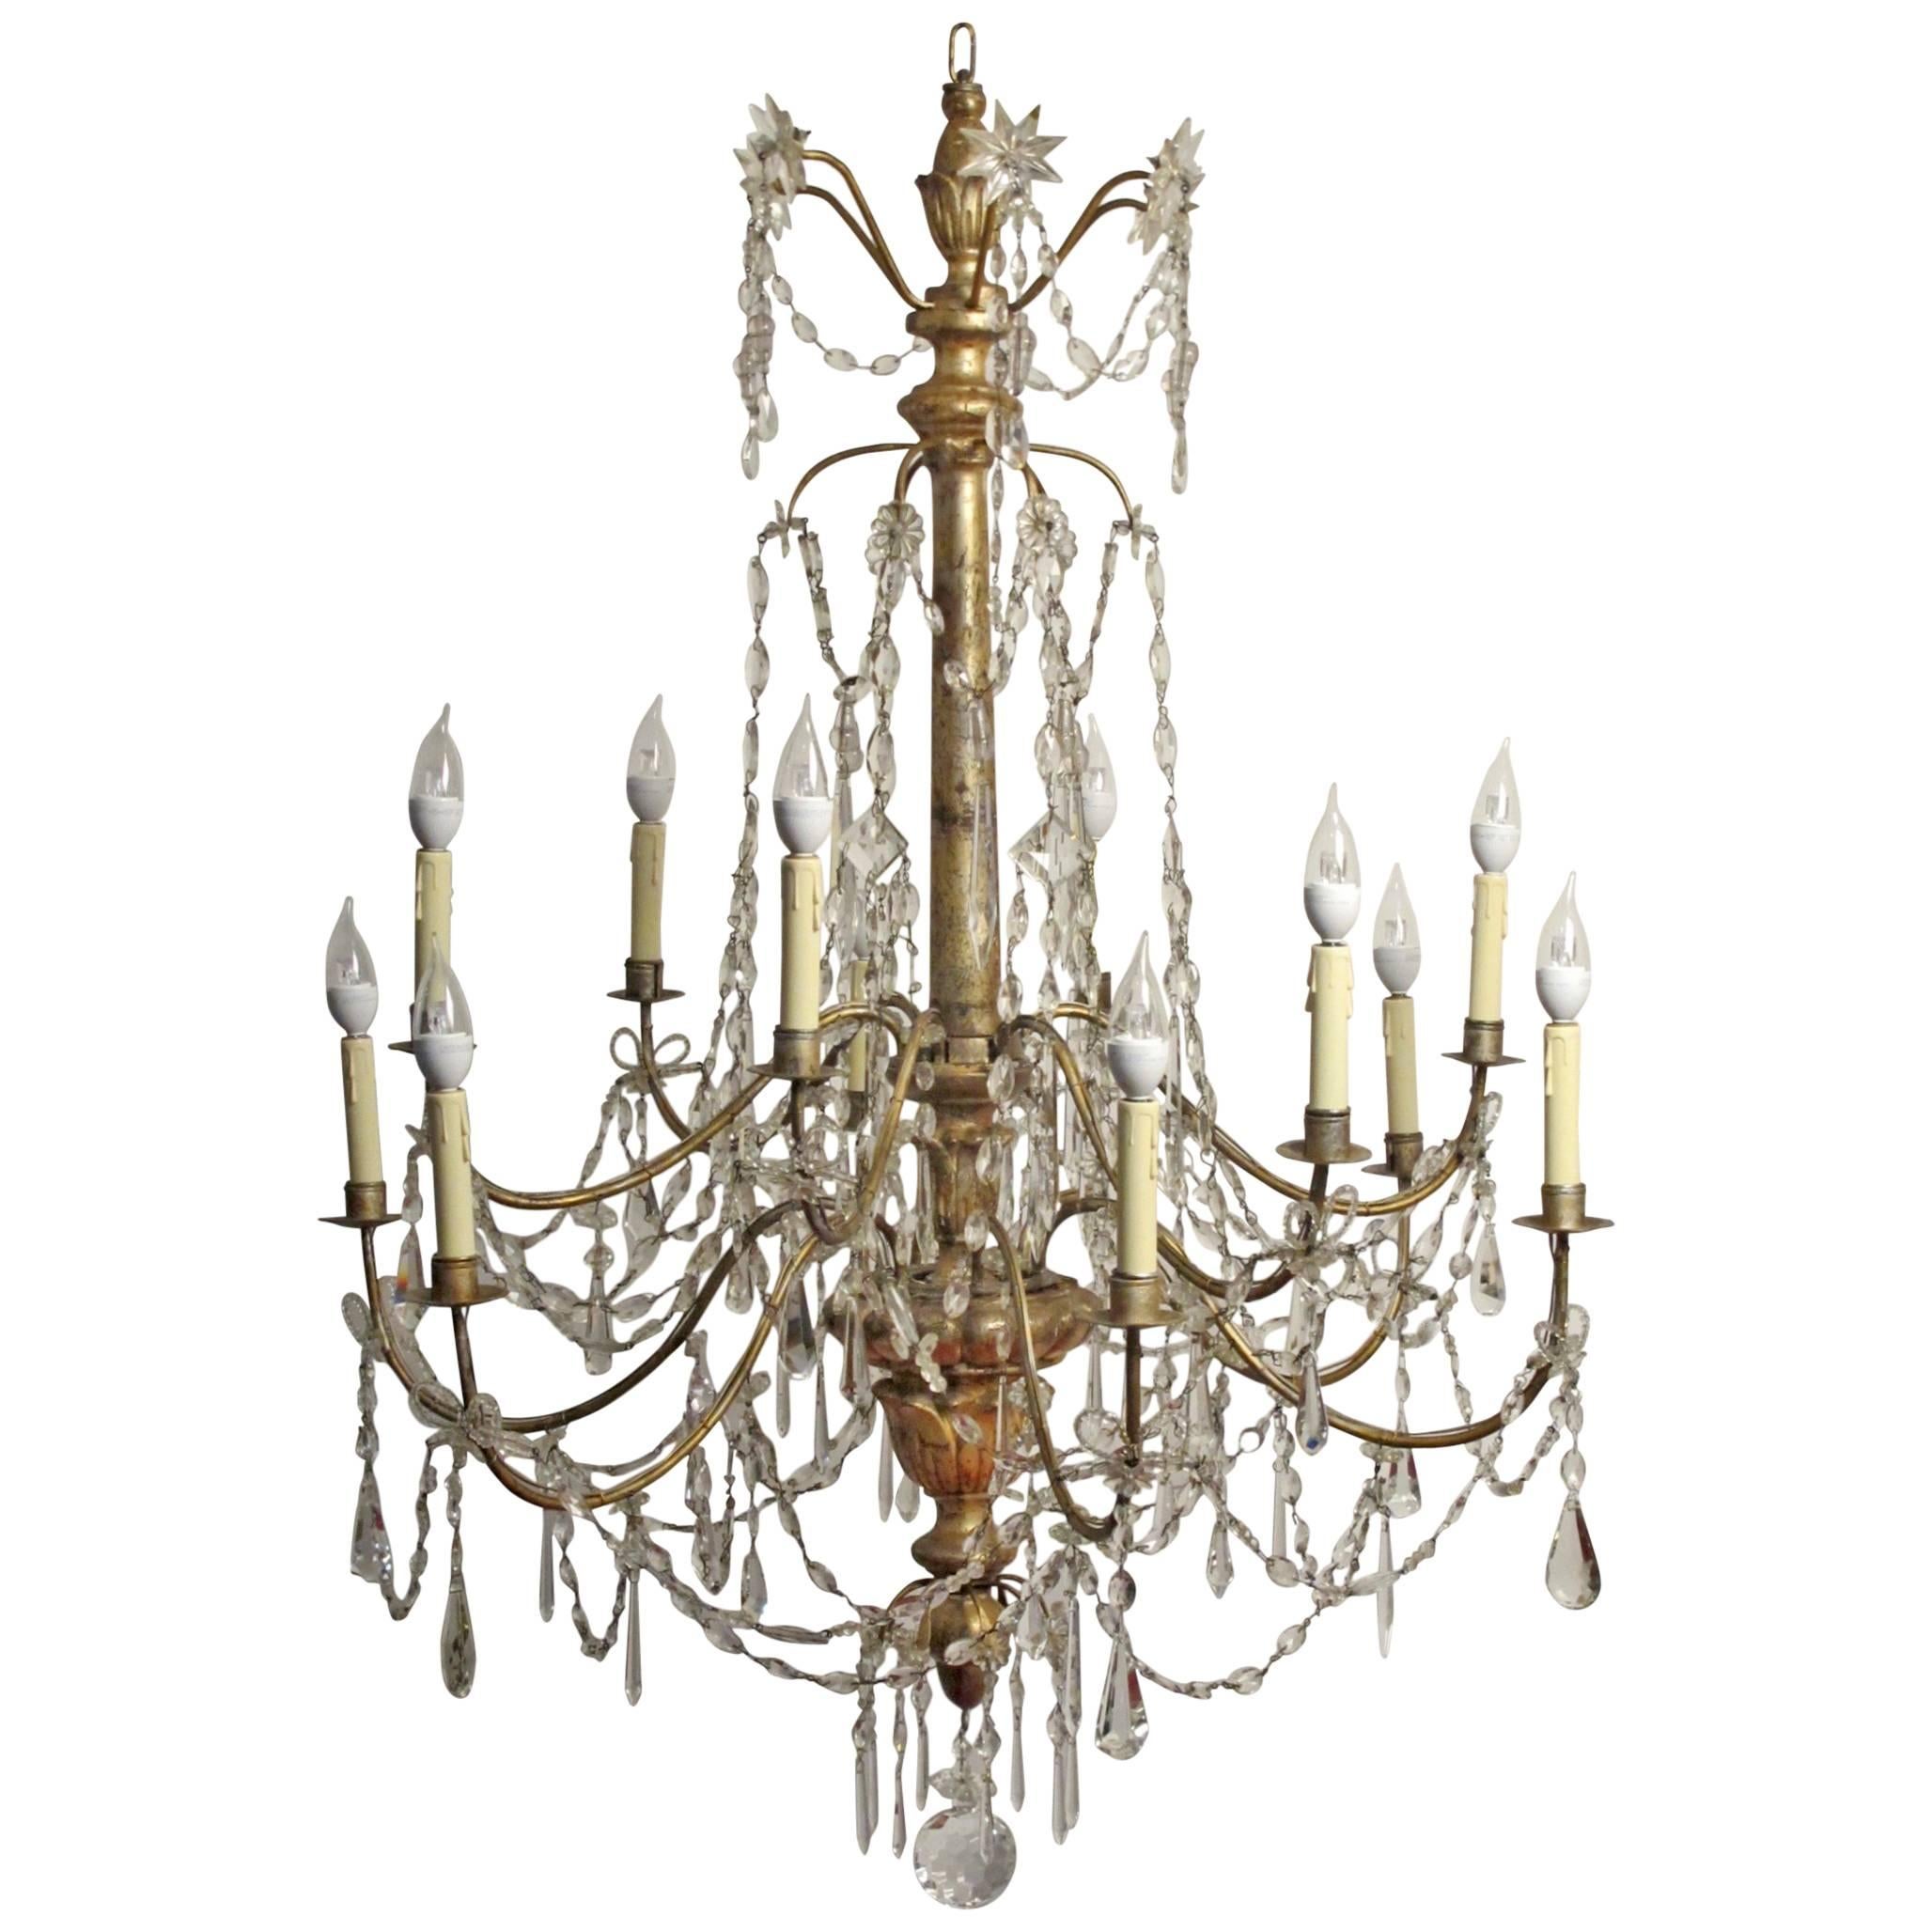 Large Silver Gilt Wood, Iron, and Crystal Chandelier, Italian 18th Century For Sale